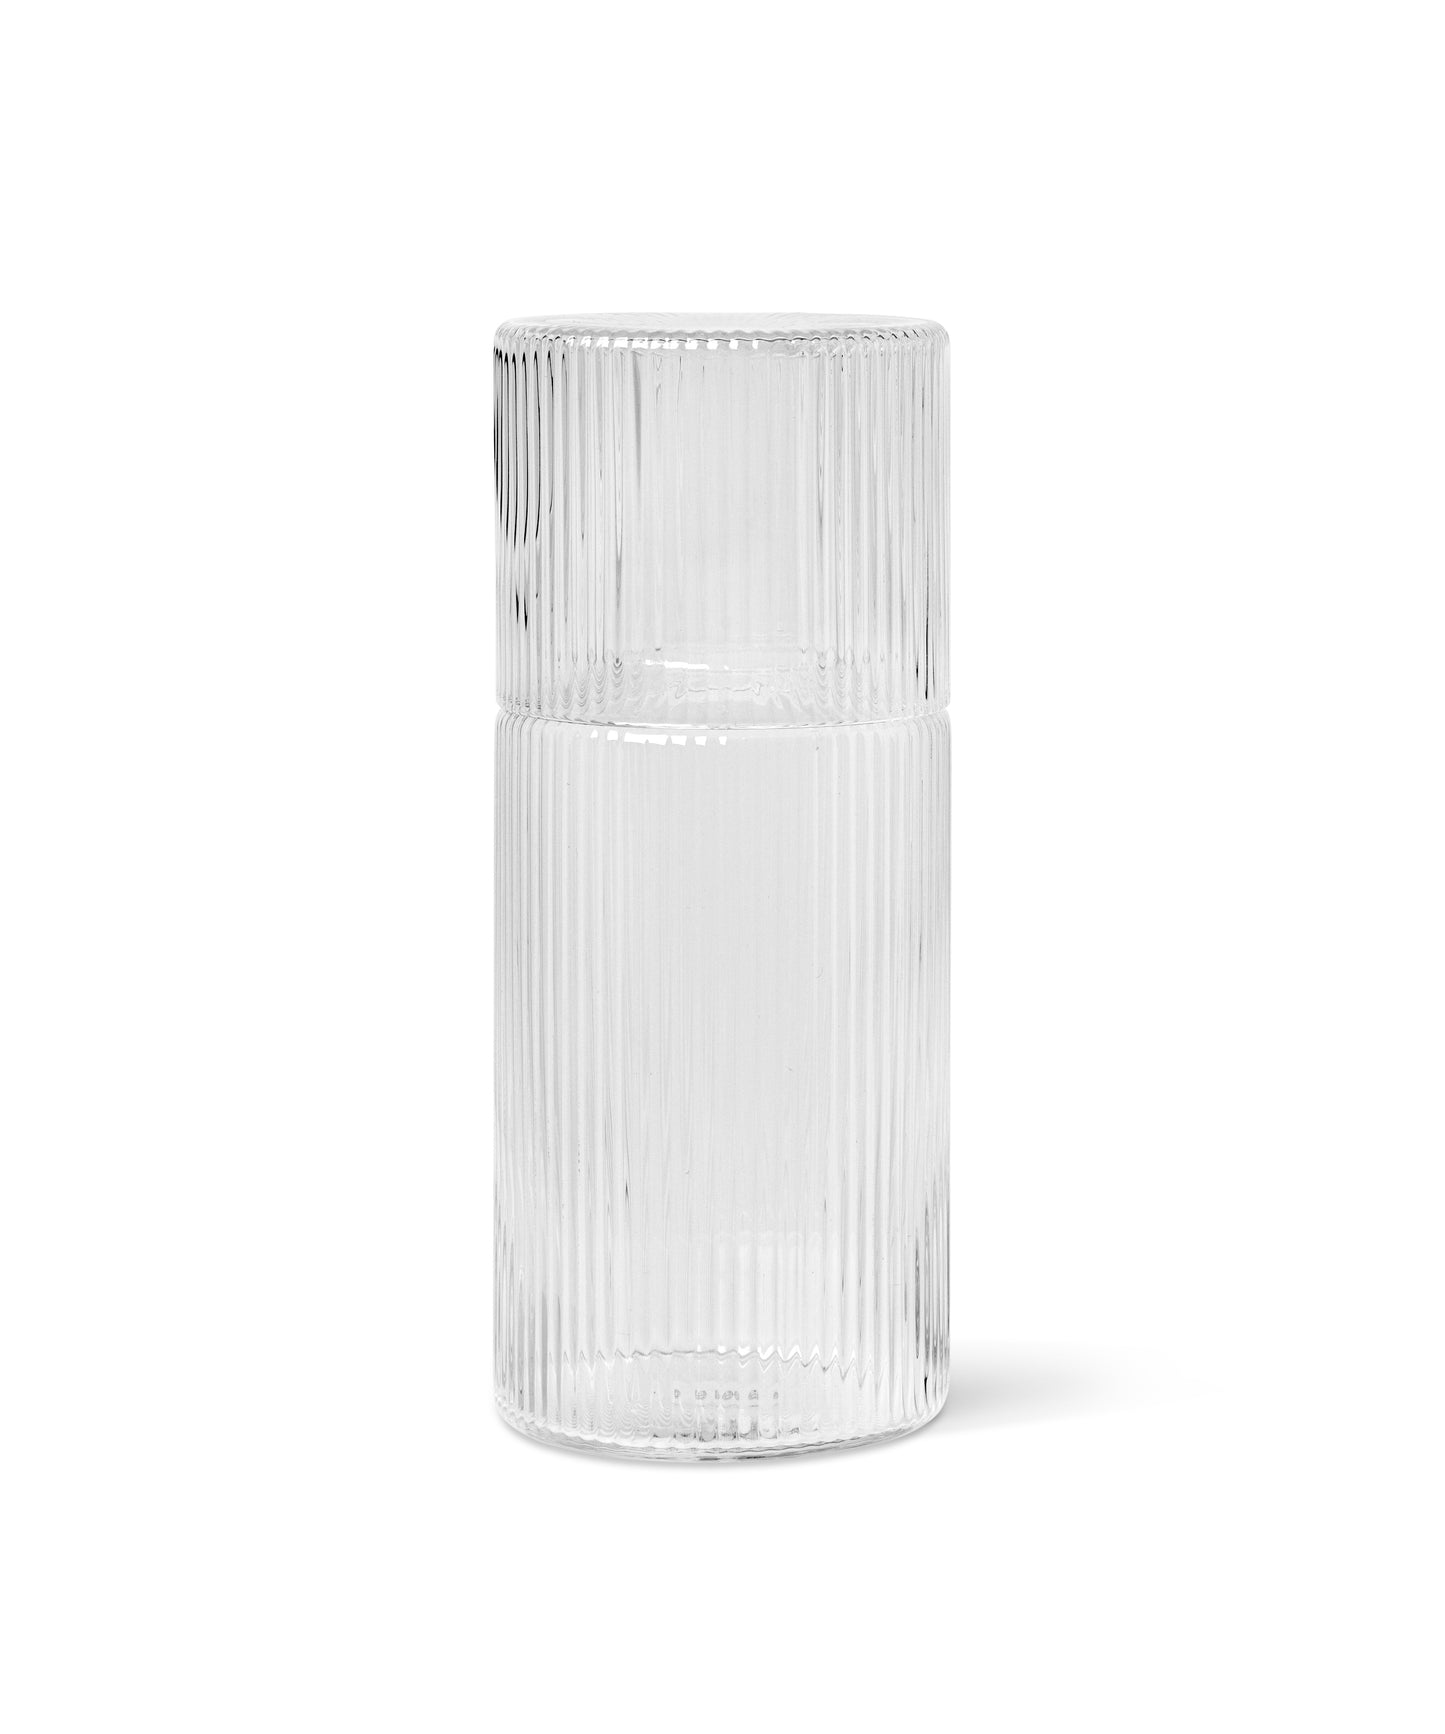 Ripple Carafe - Small by ferm LIVING